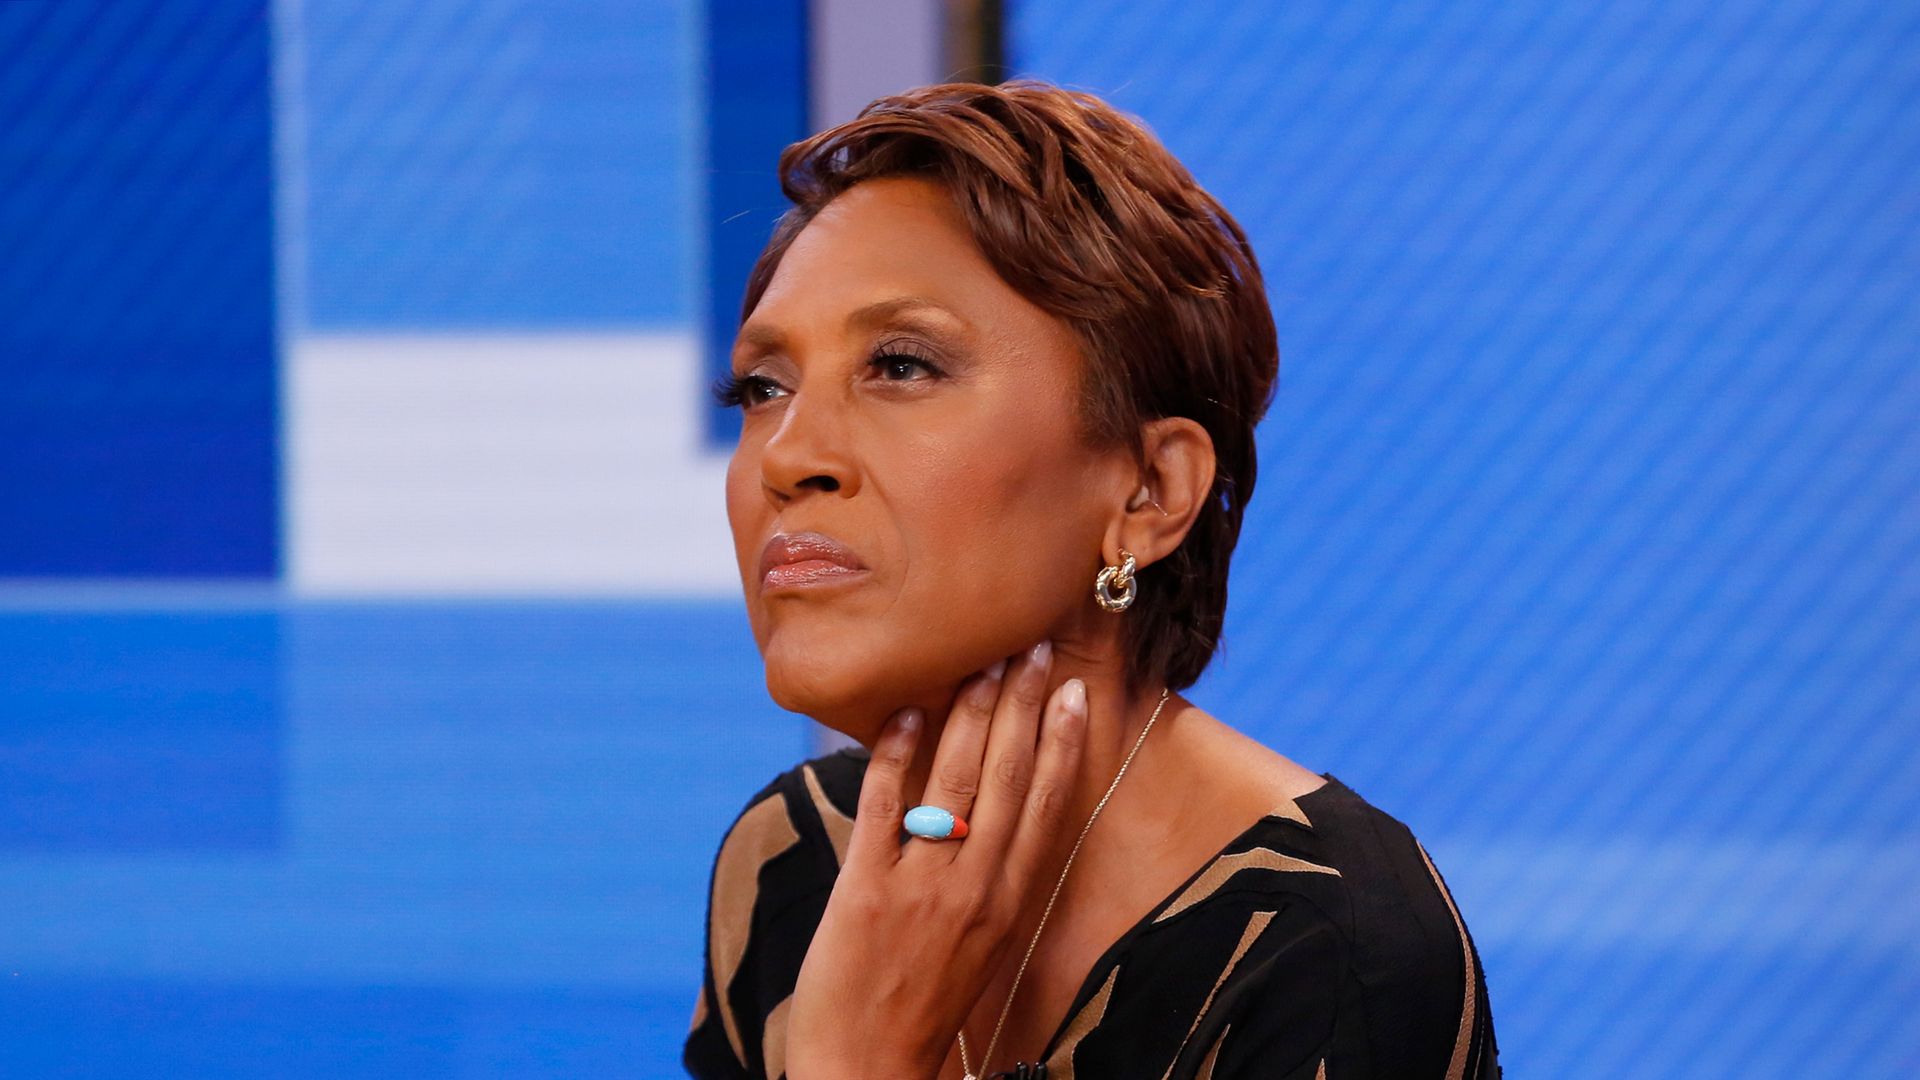 GOOD MORNING AMERICA - 9/23/19
Show coverage of "Good Morning America," Monday, September 23, 2019 on the Walt Disney Television Network.  GMA19
ROBIN ROBERTS